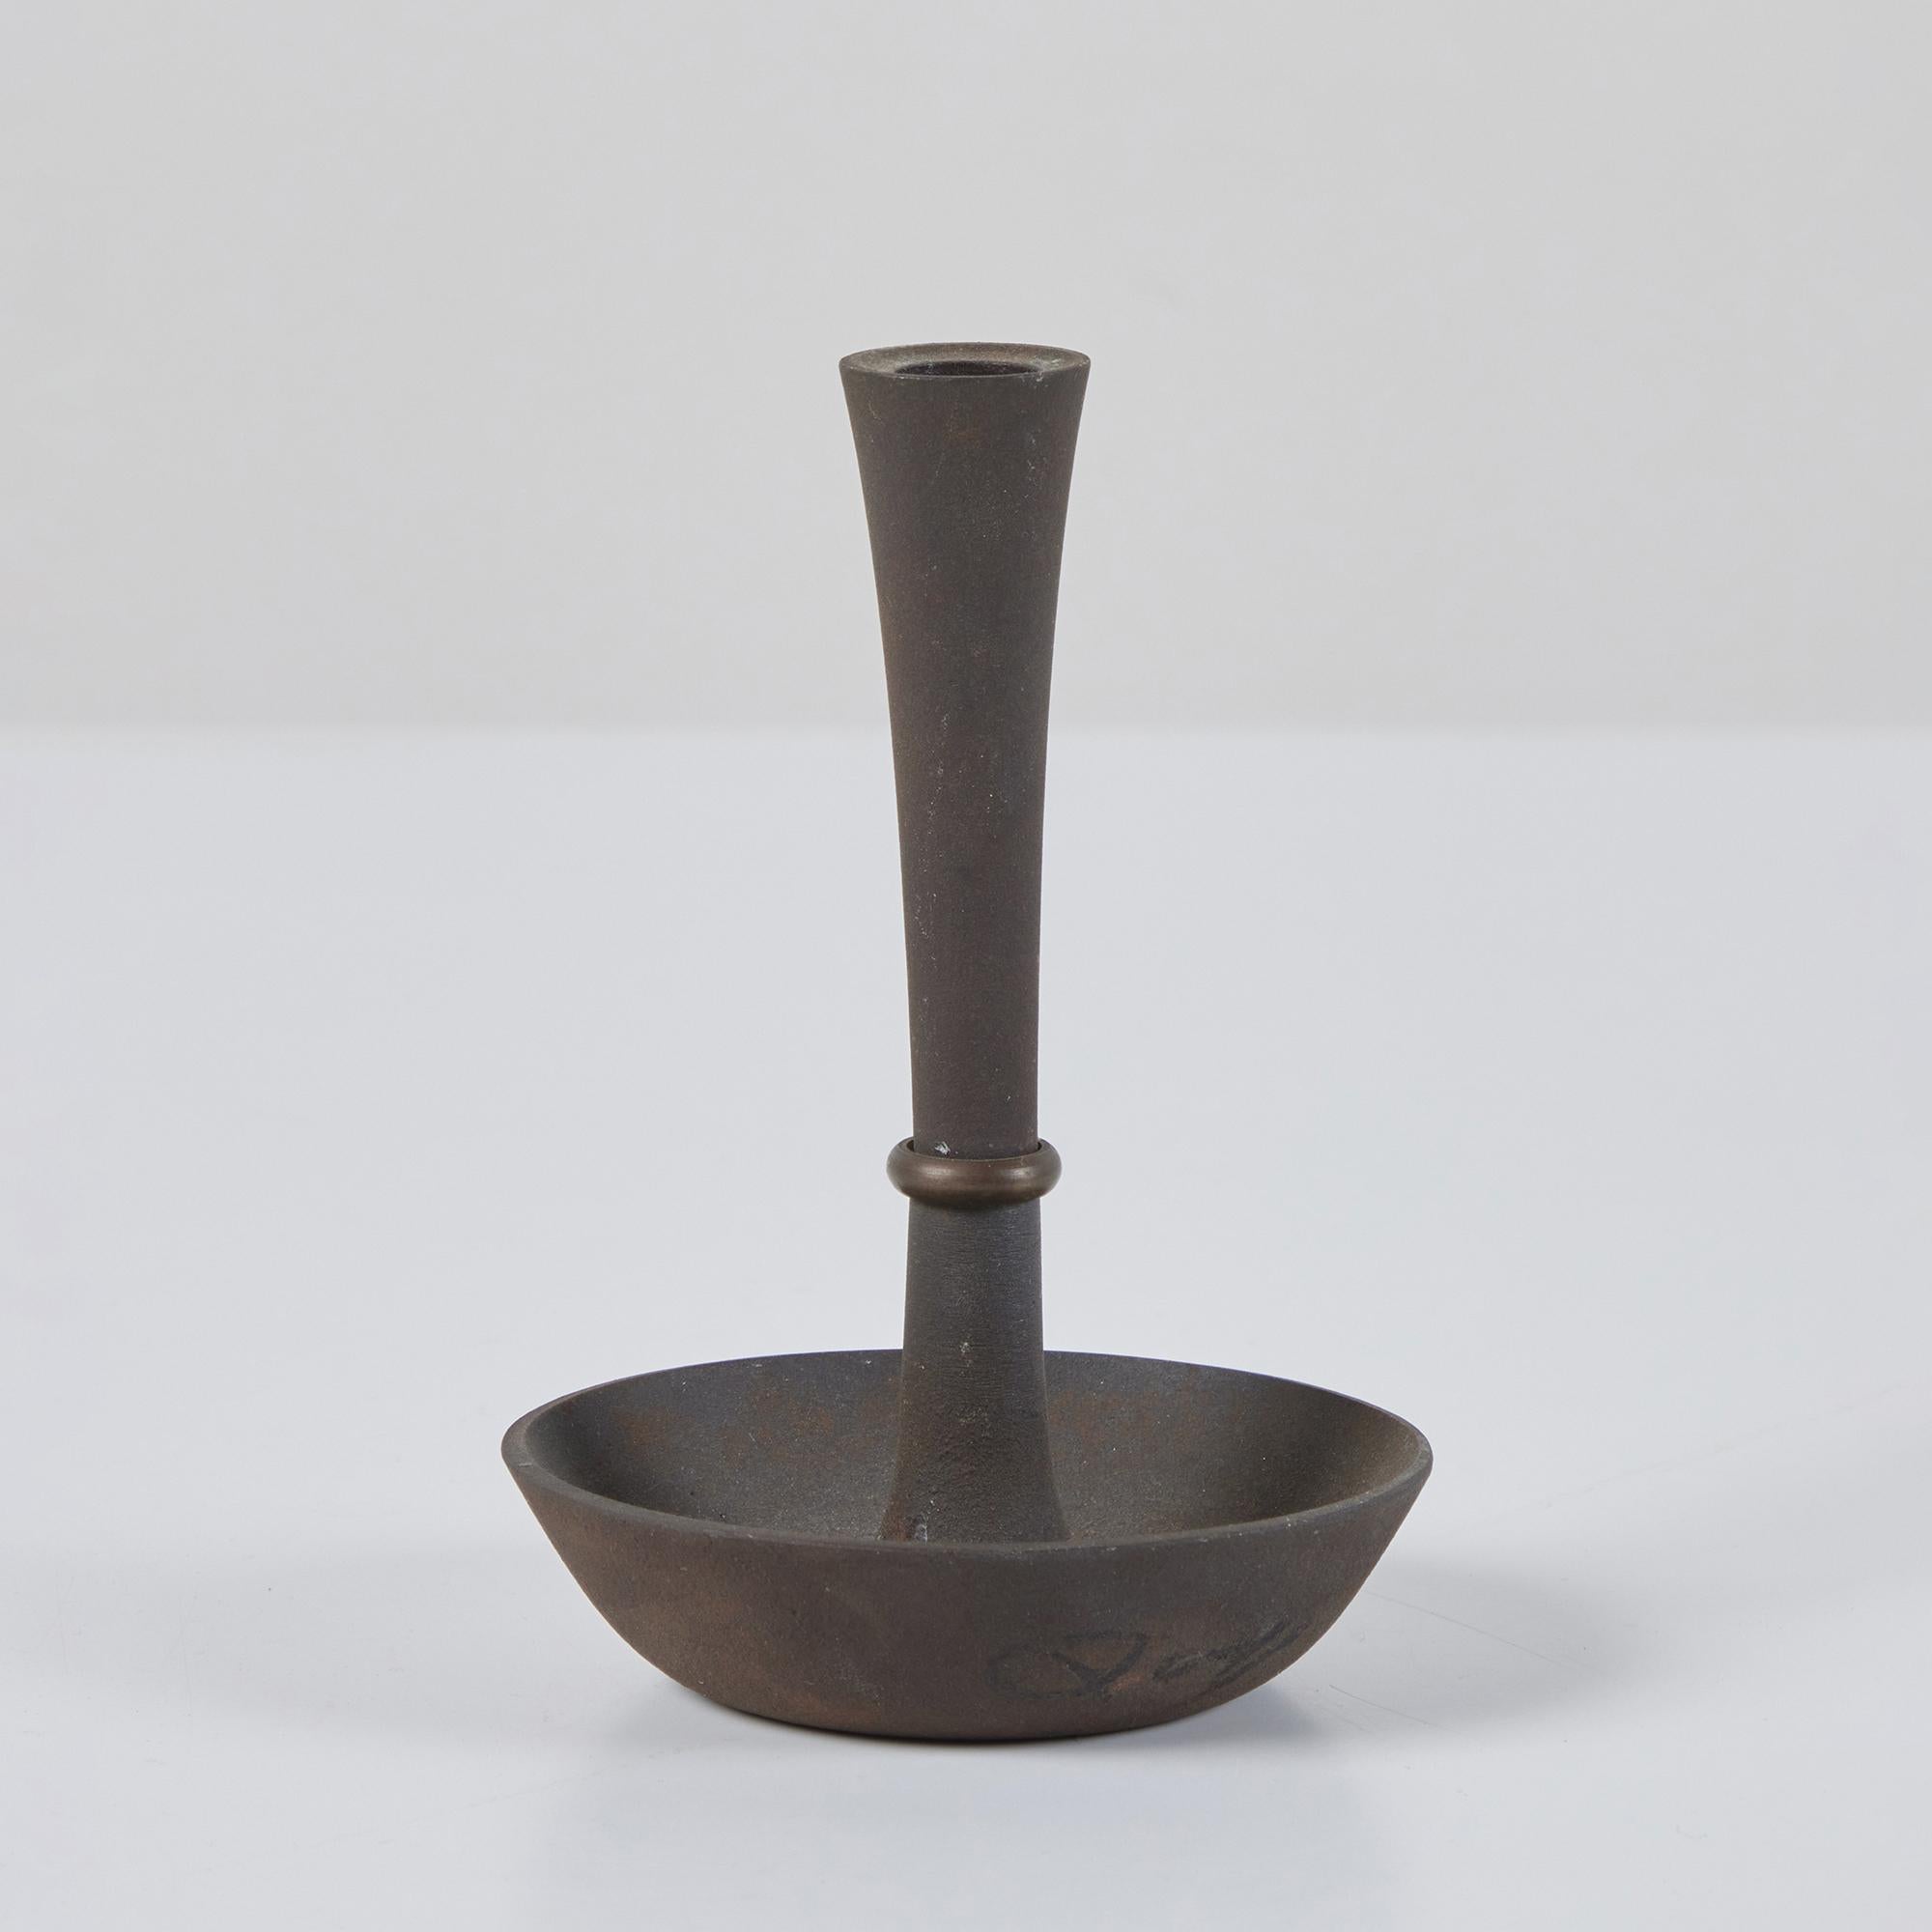 Single iron and brass candle holder by Jens Quistgaard for Dansk. This example was produced in Denmark in the 1960s for only a short time. It features a cast iron body and round curved base, with a patinated brass ring around the stem.
Impressed 